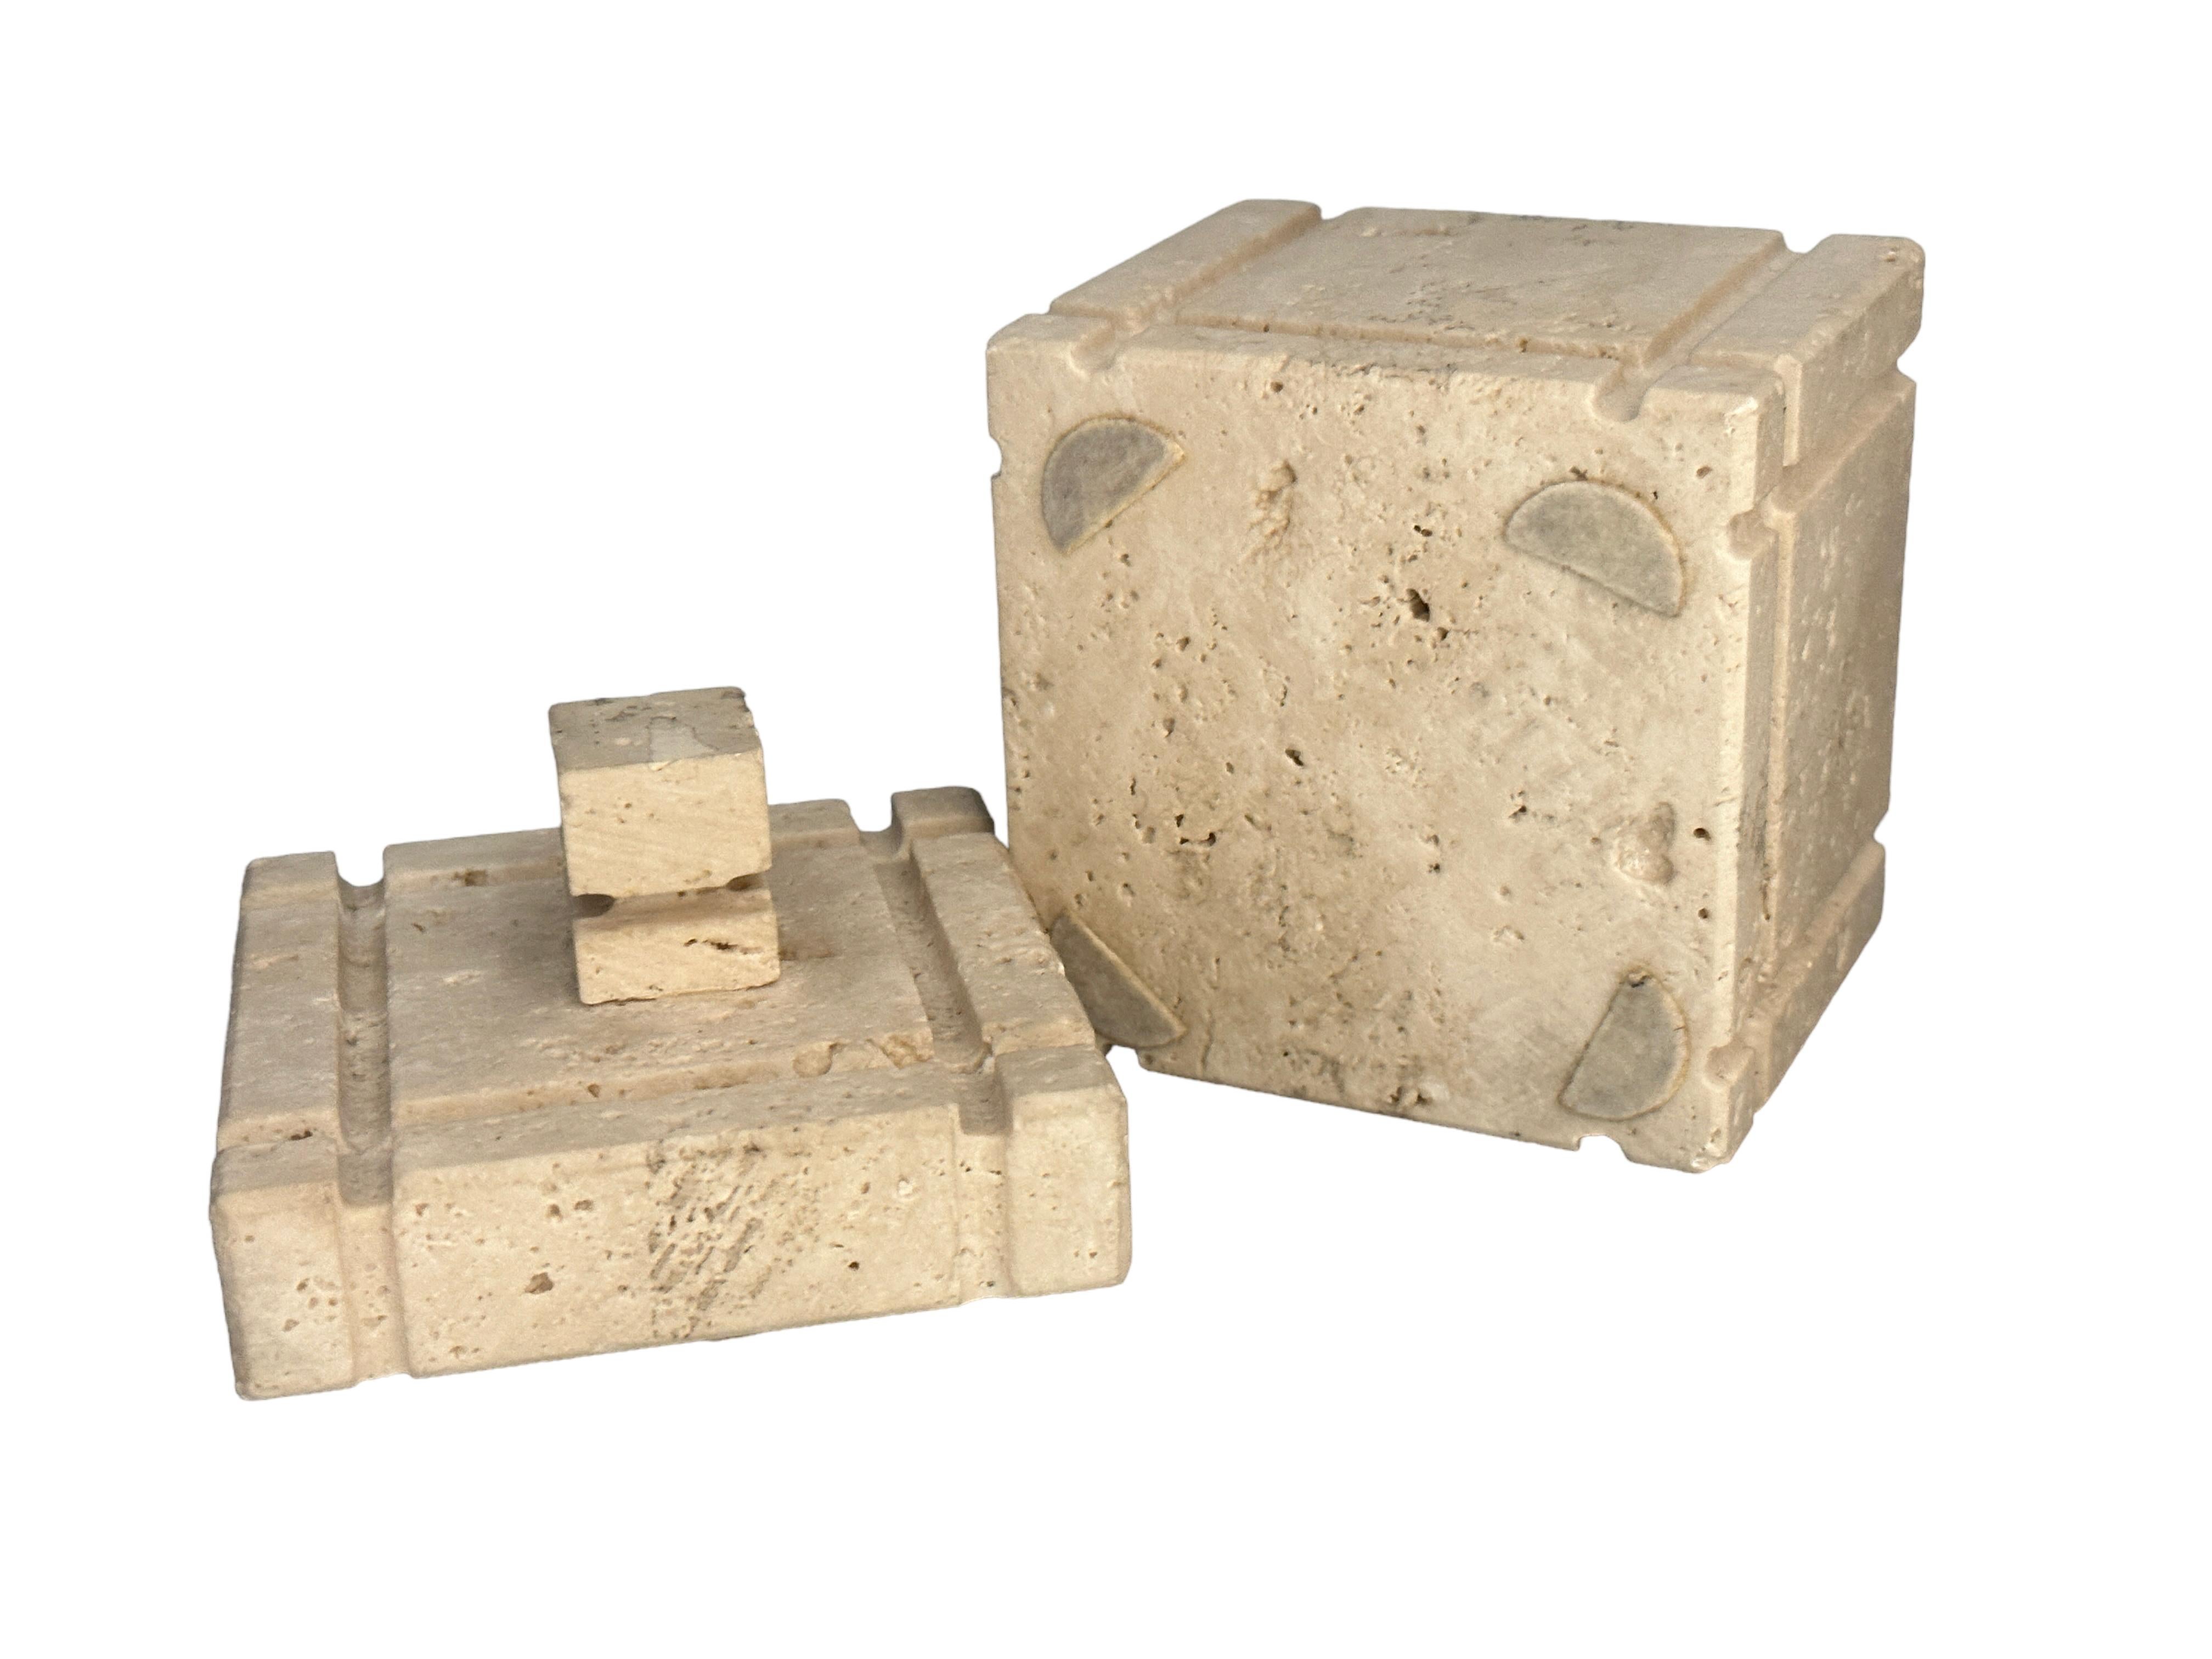 Midcentury Travertine Marble Italian Box Catchall by Fratelli Manelli, 1970s For Sale 3